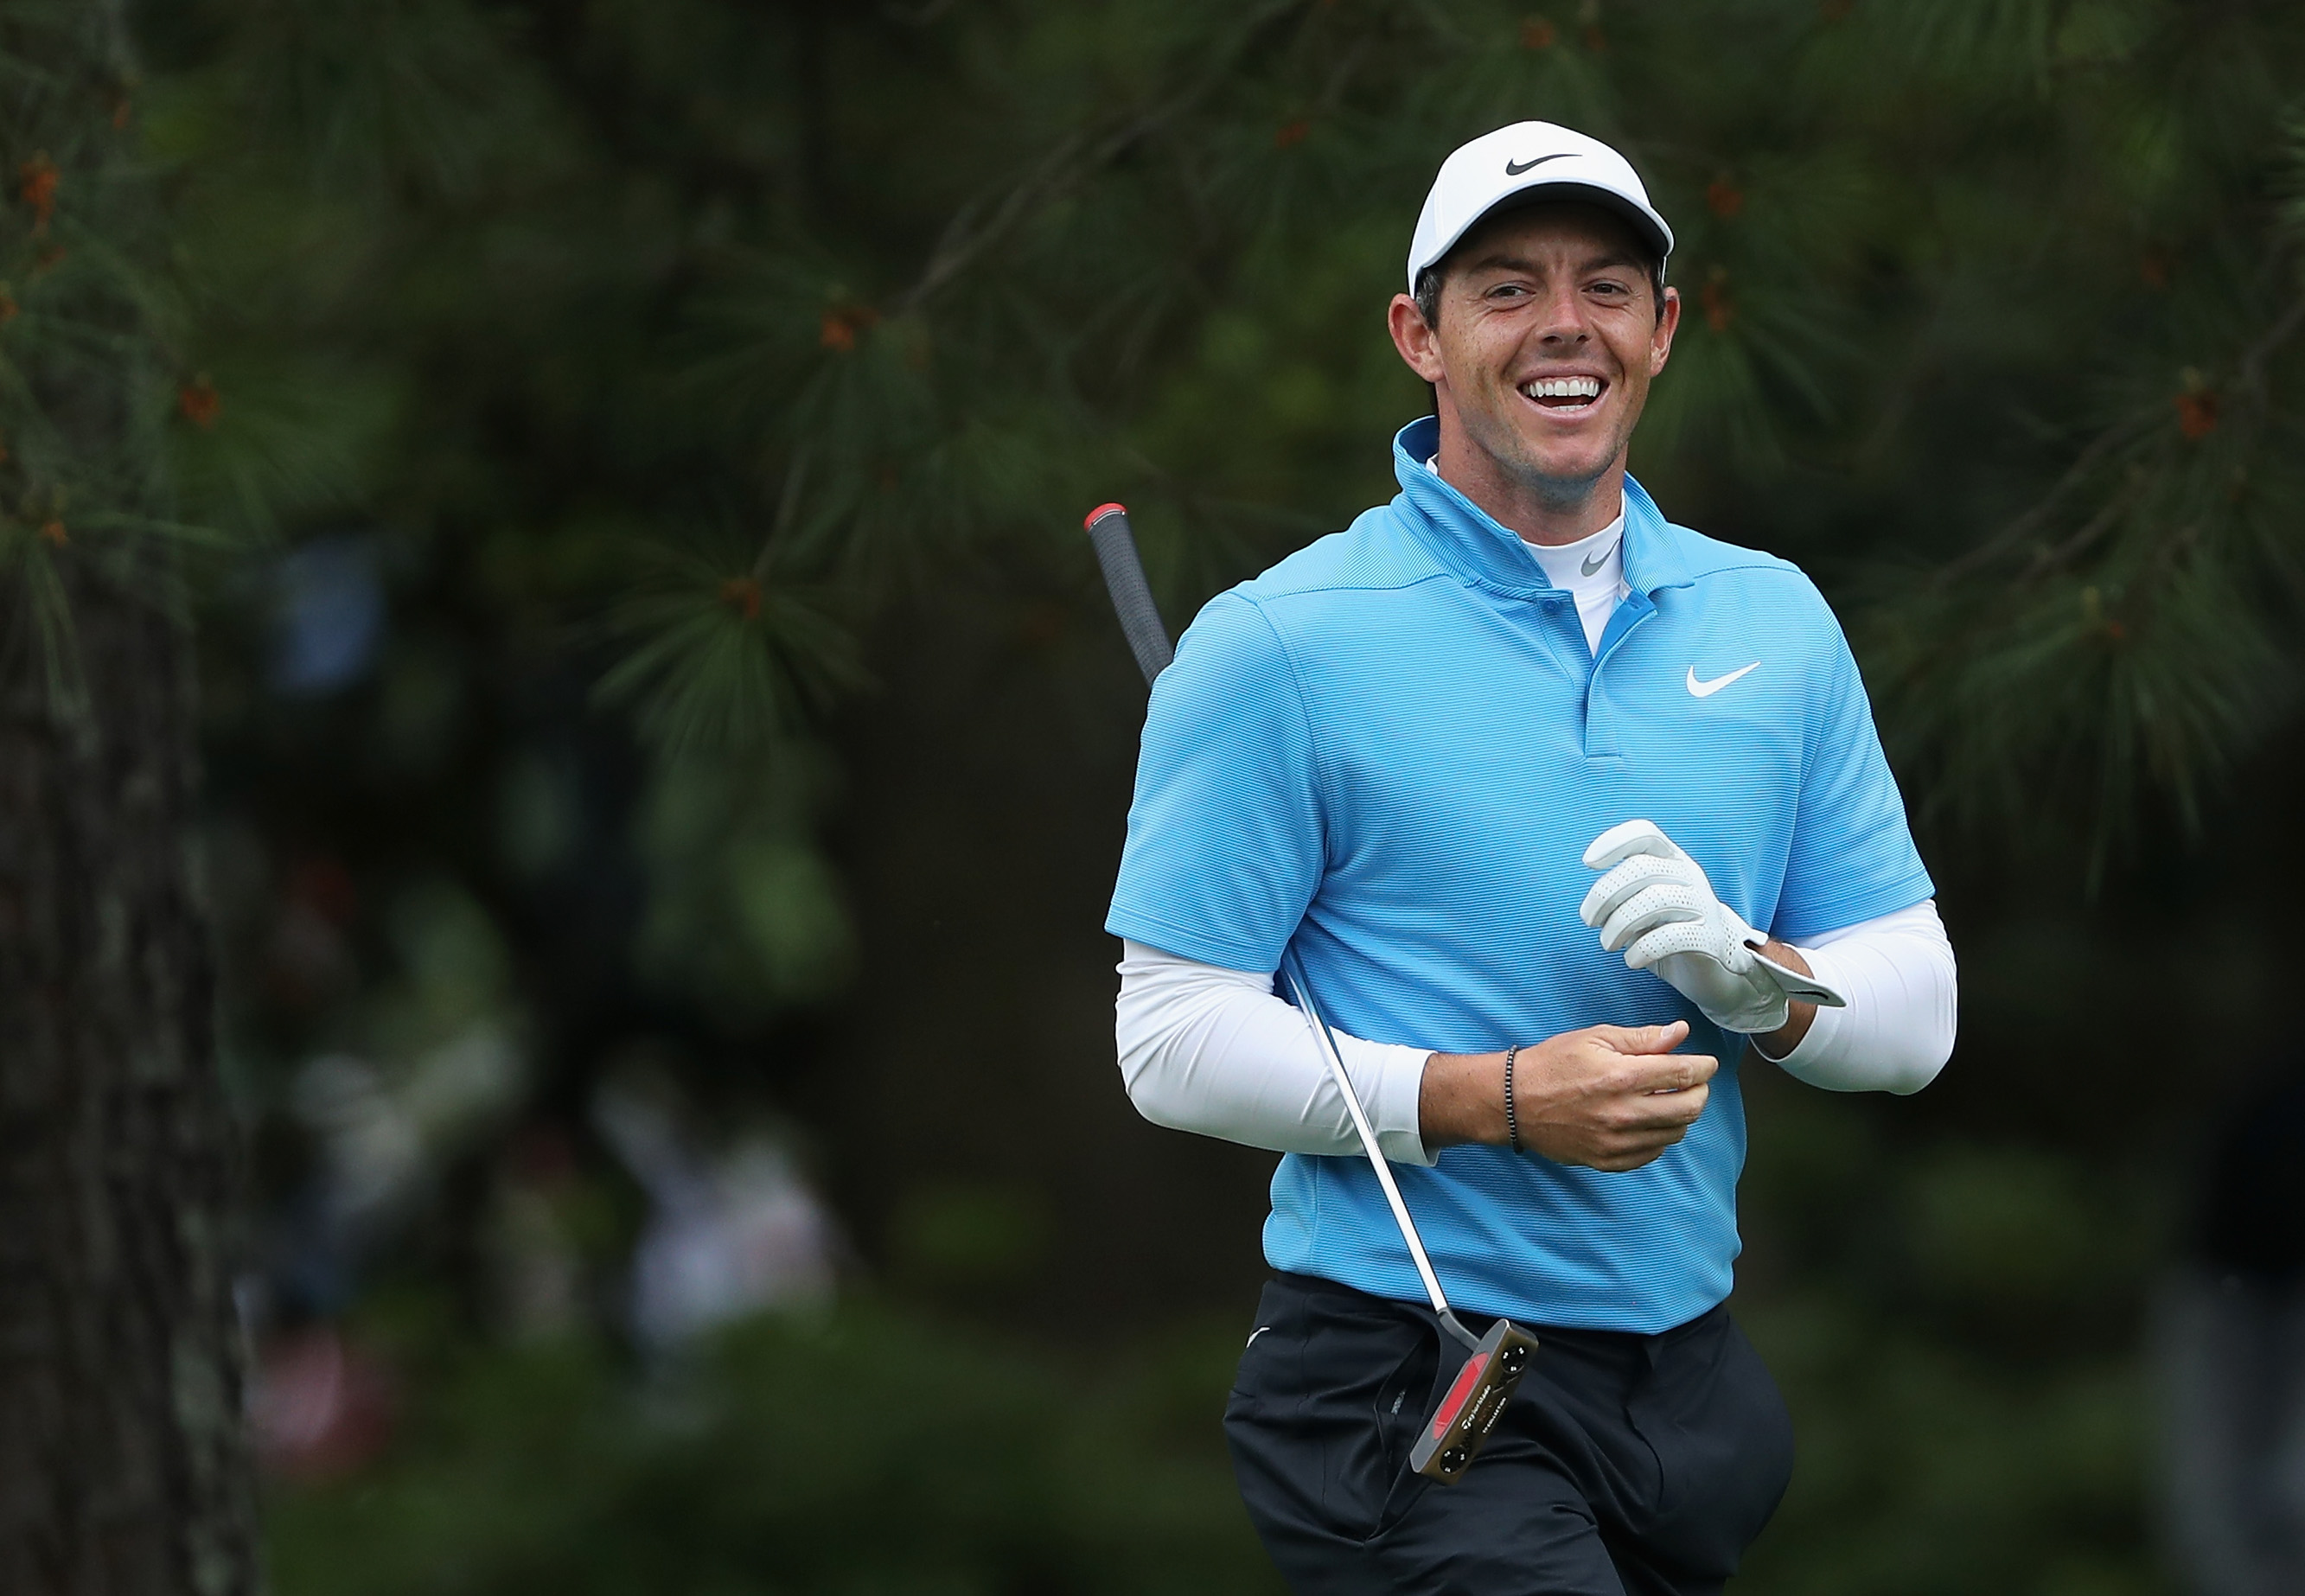 Rory McIlroy fires shots at Patrick Reed ahead of Masters final day